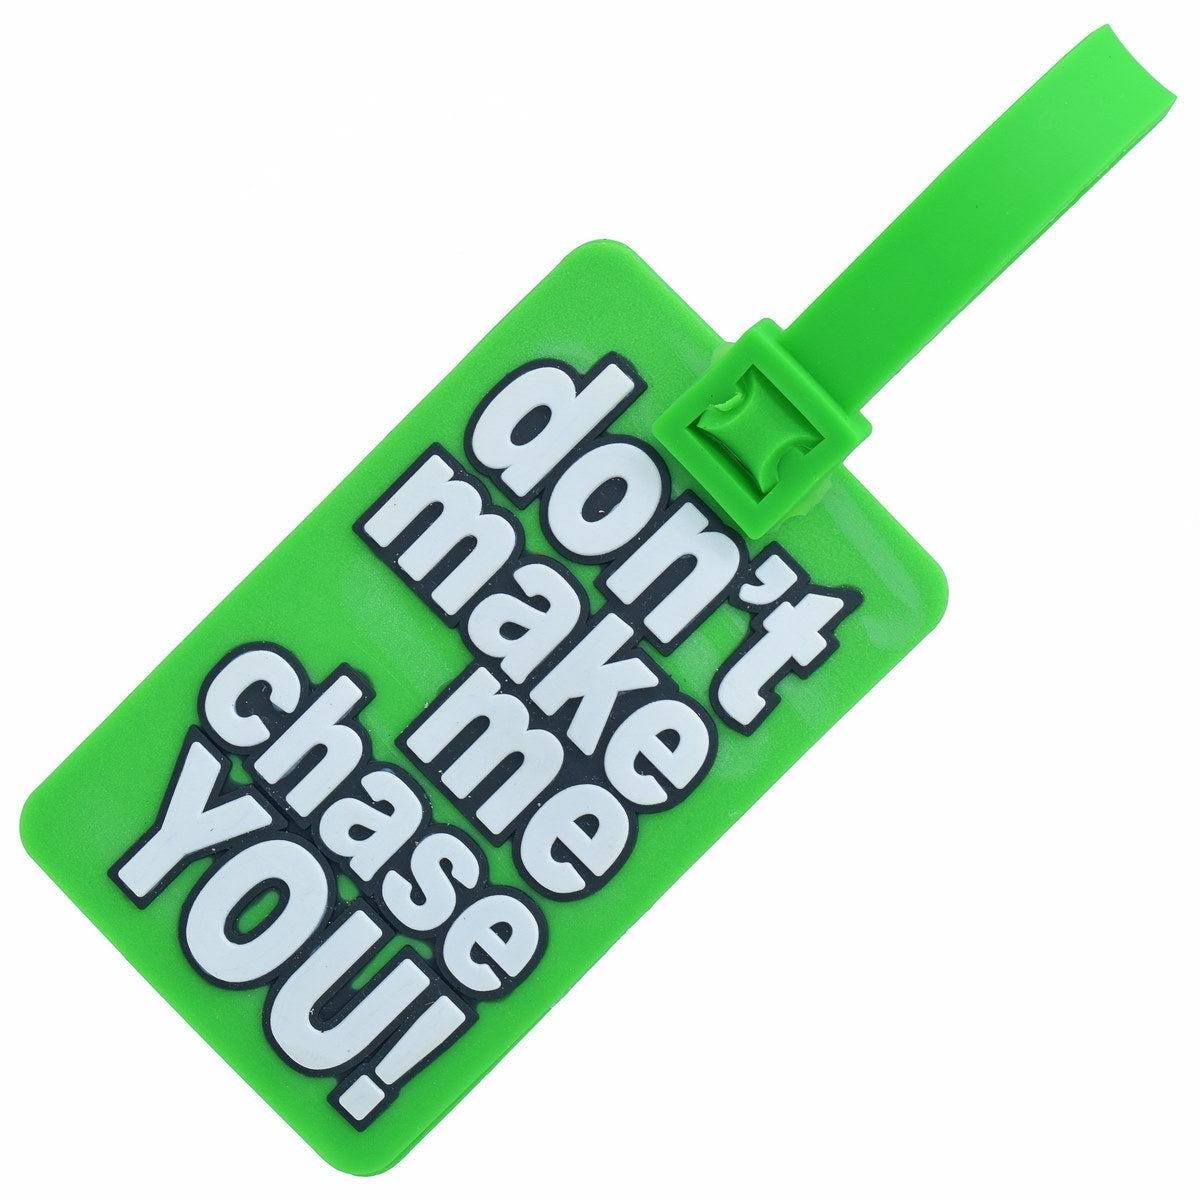 jags-mumbai Household Goods Luggage tag silicon Don't Make Me Chase You